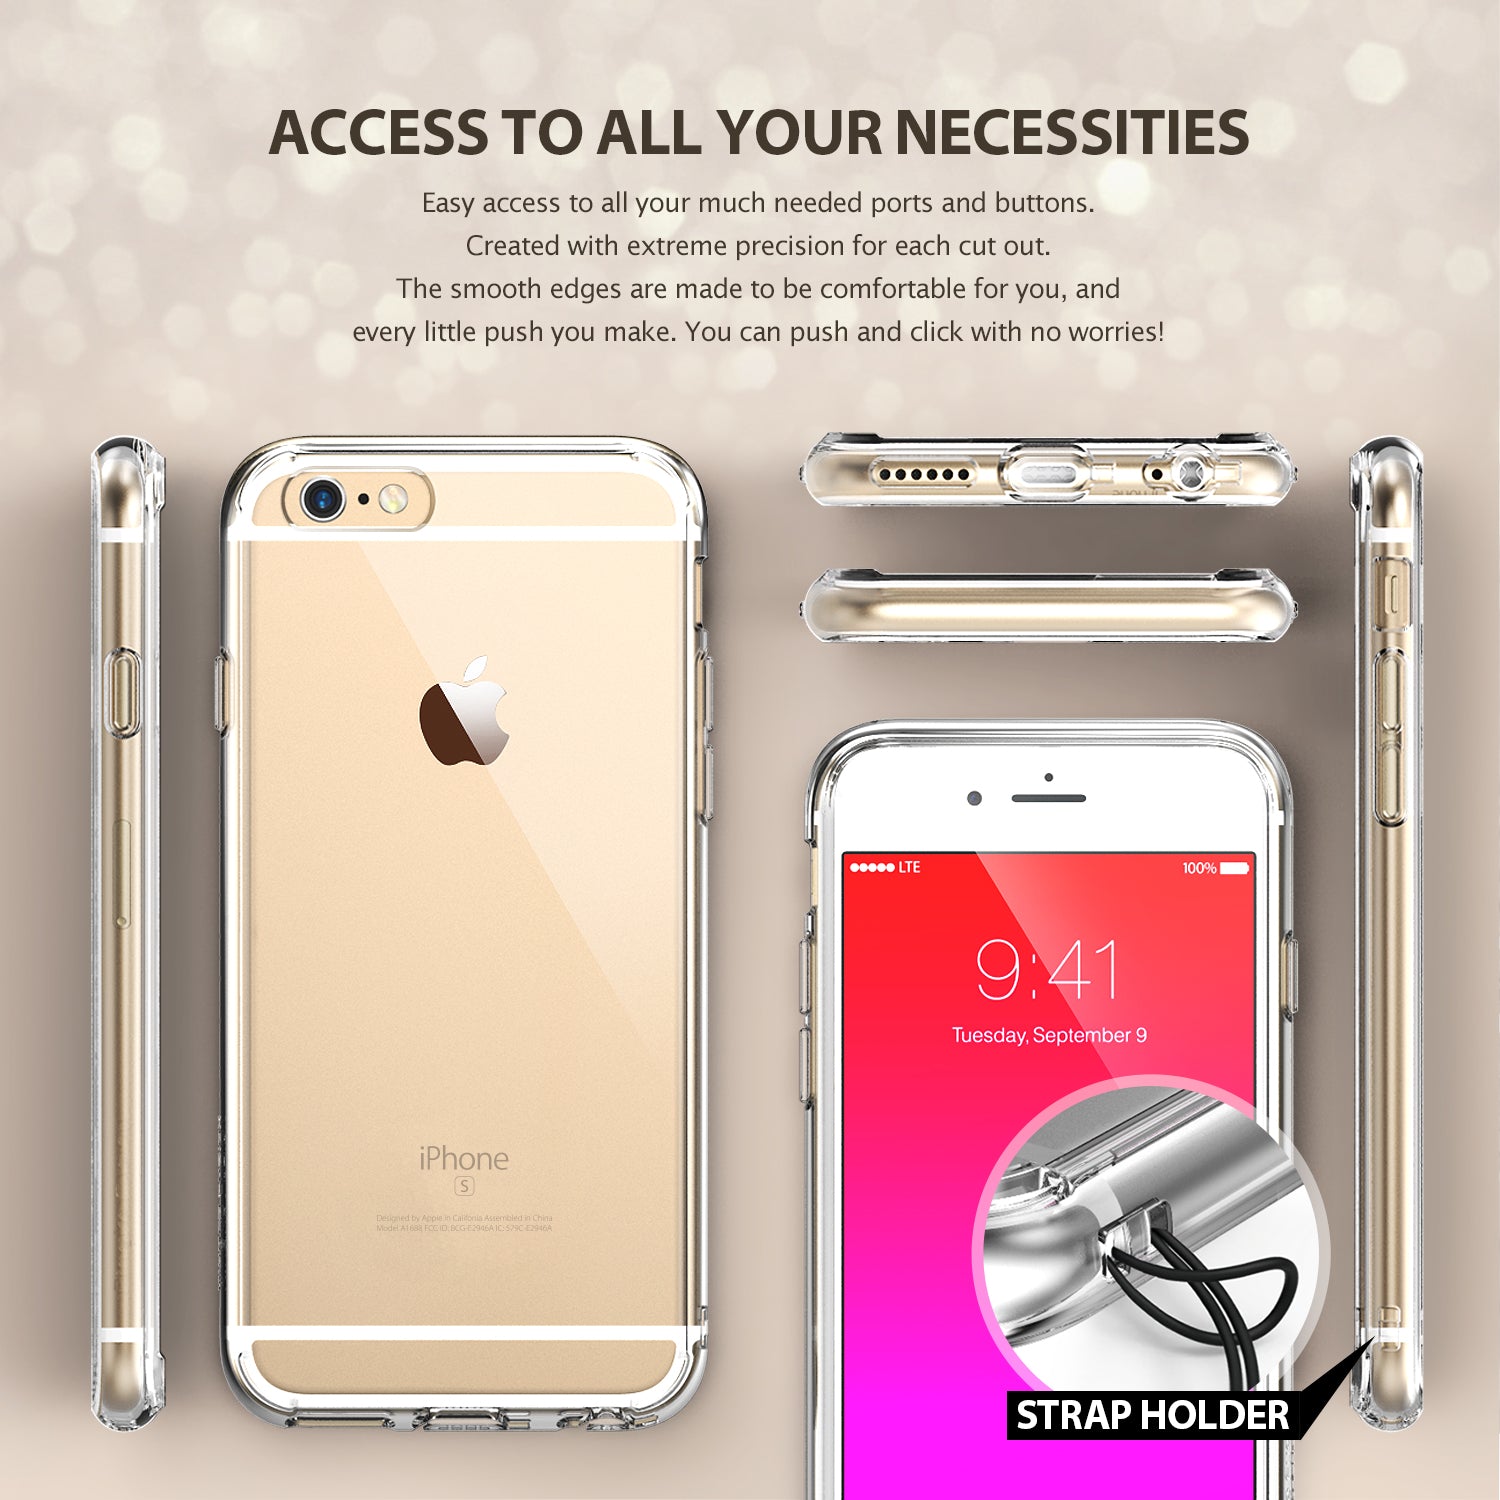 iPhone 6s Case | Fusion - Access to all your necessities